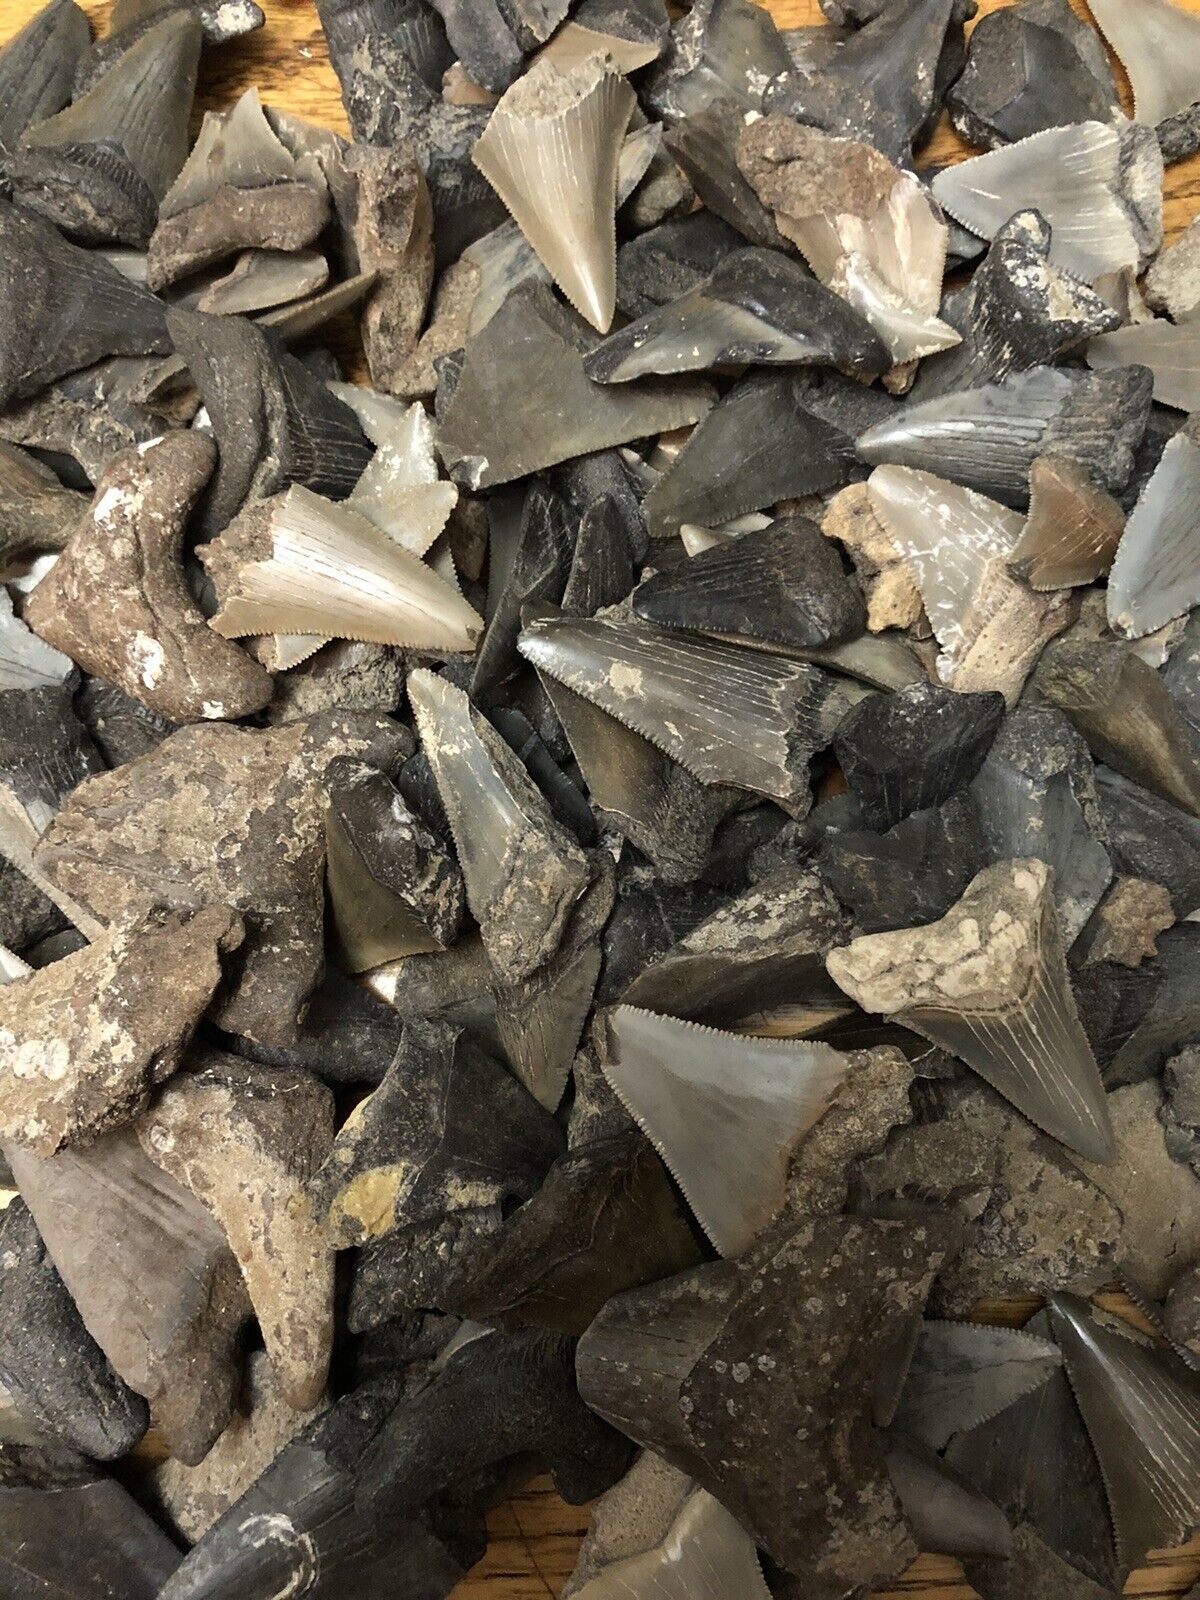 Shark Tooth Lot Of 10 Megalodon And Angustiden Teeth Fossil Shark Tooth